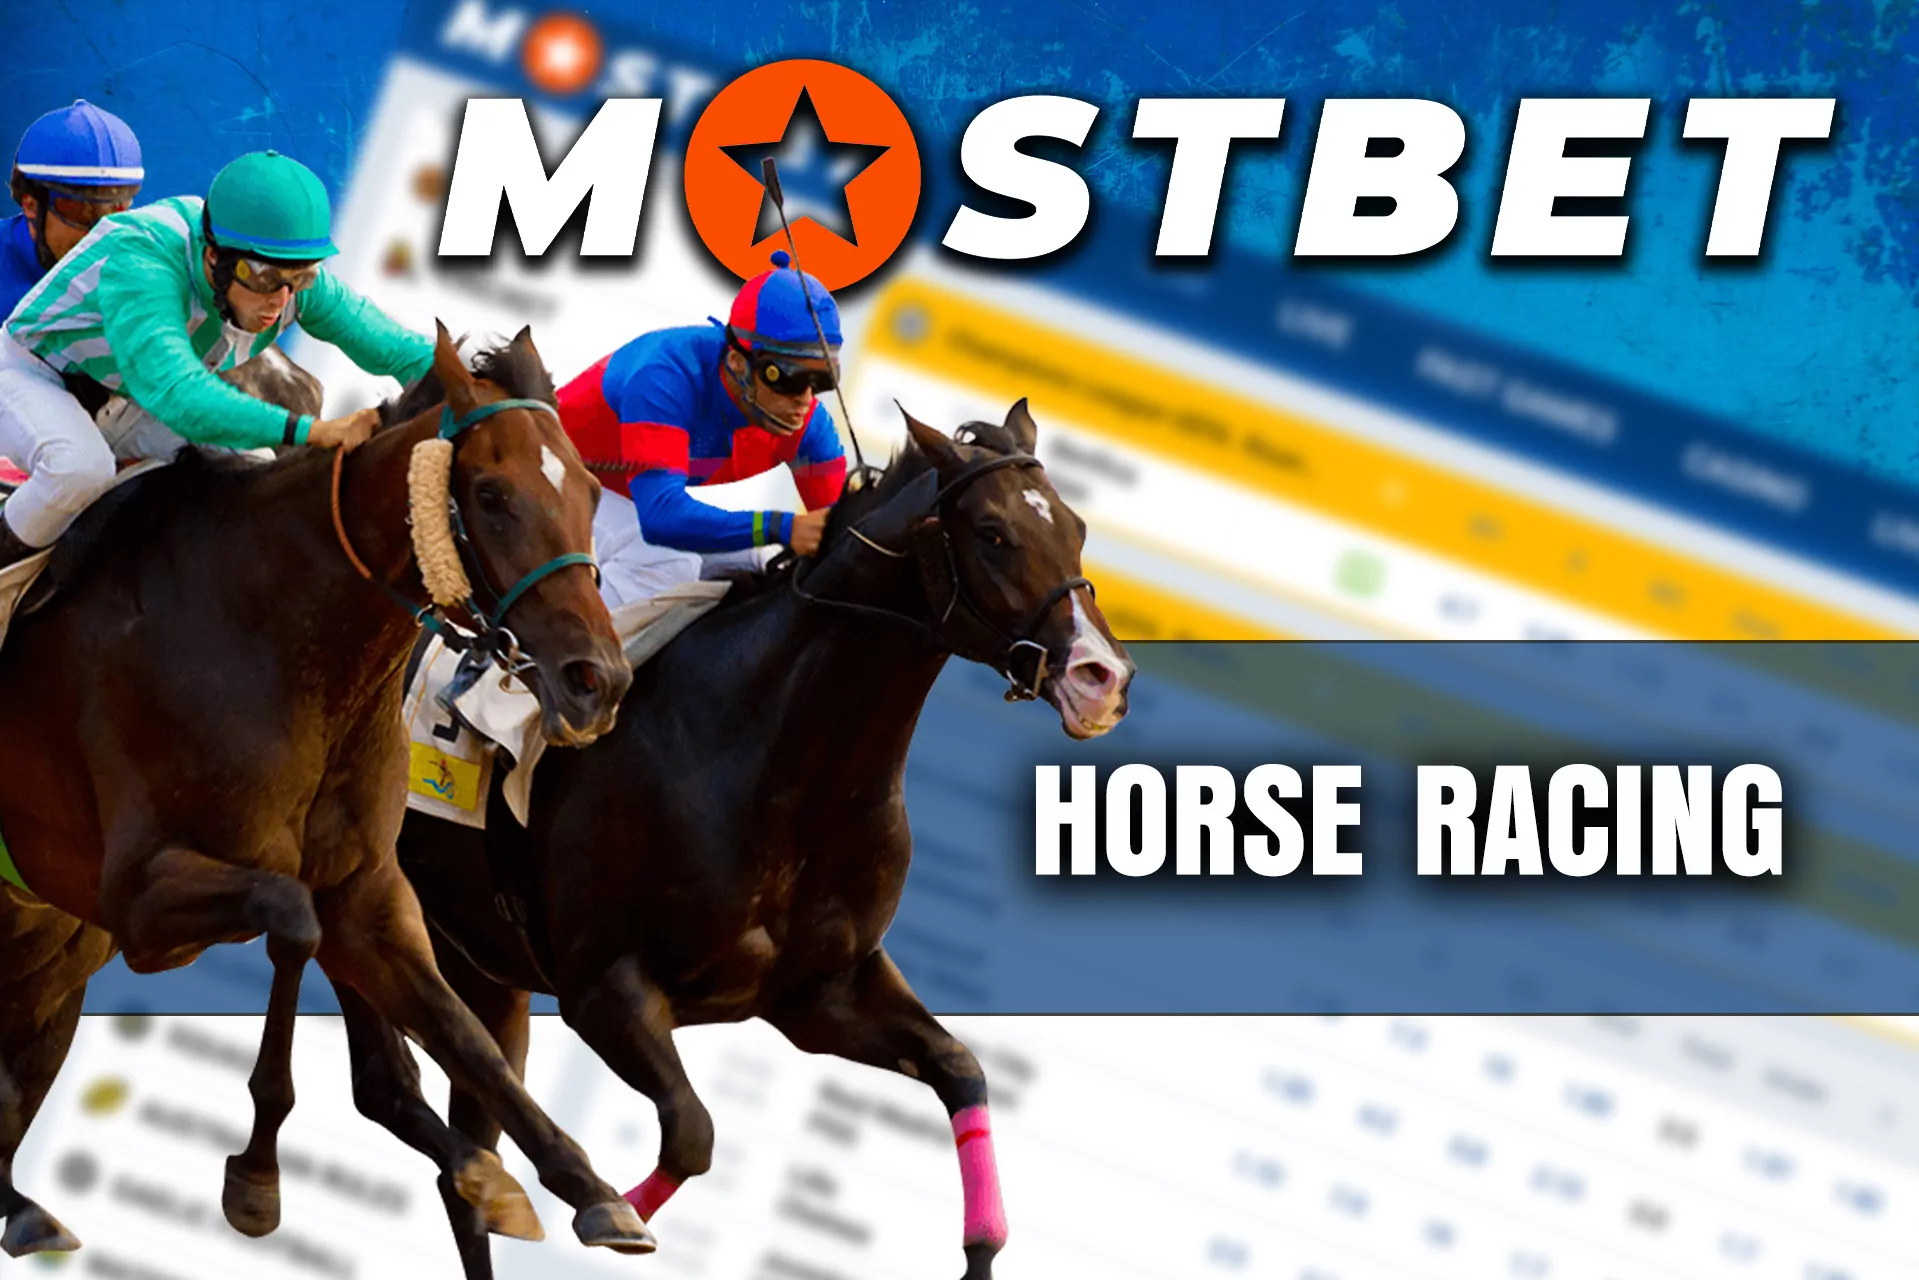 Mostbethorse racing betting site with bitcoin deposits and additional benefits.